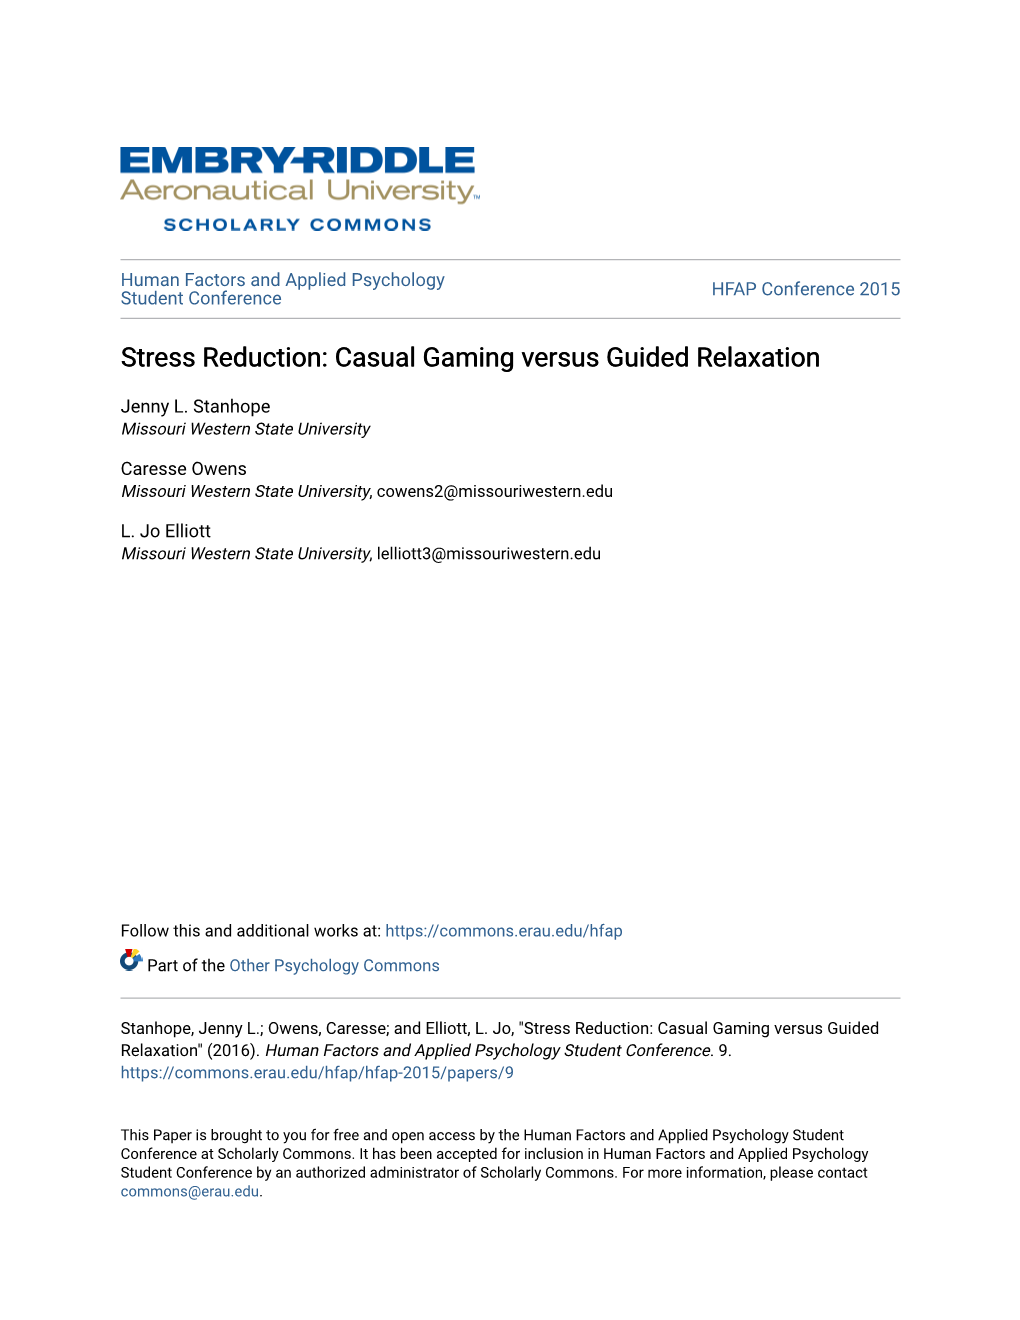 Stress Reduction: Casual Gaming Versus Guided Relaxation